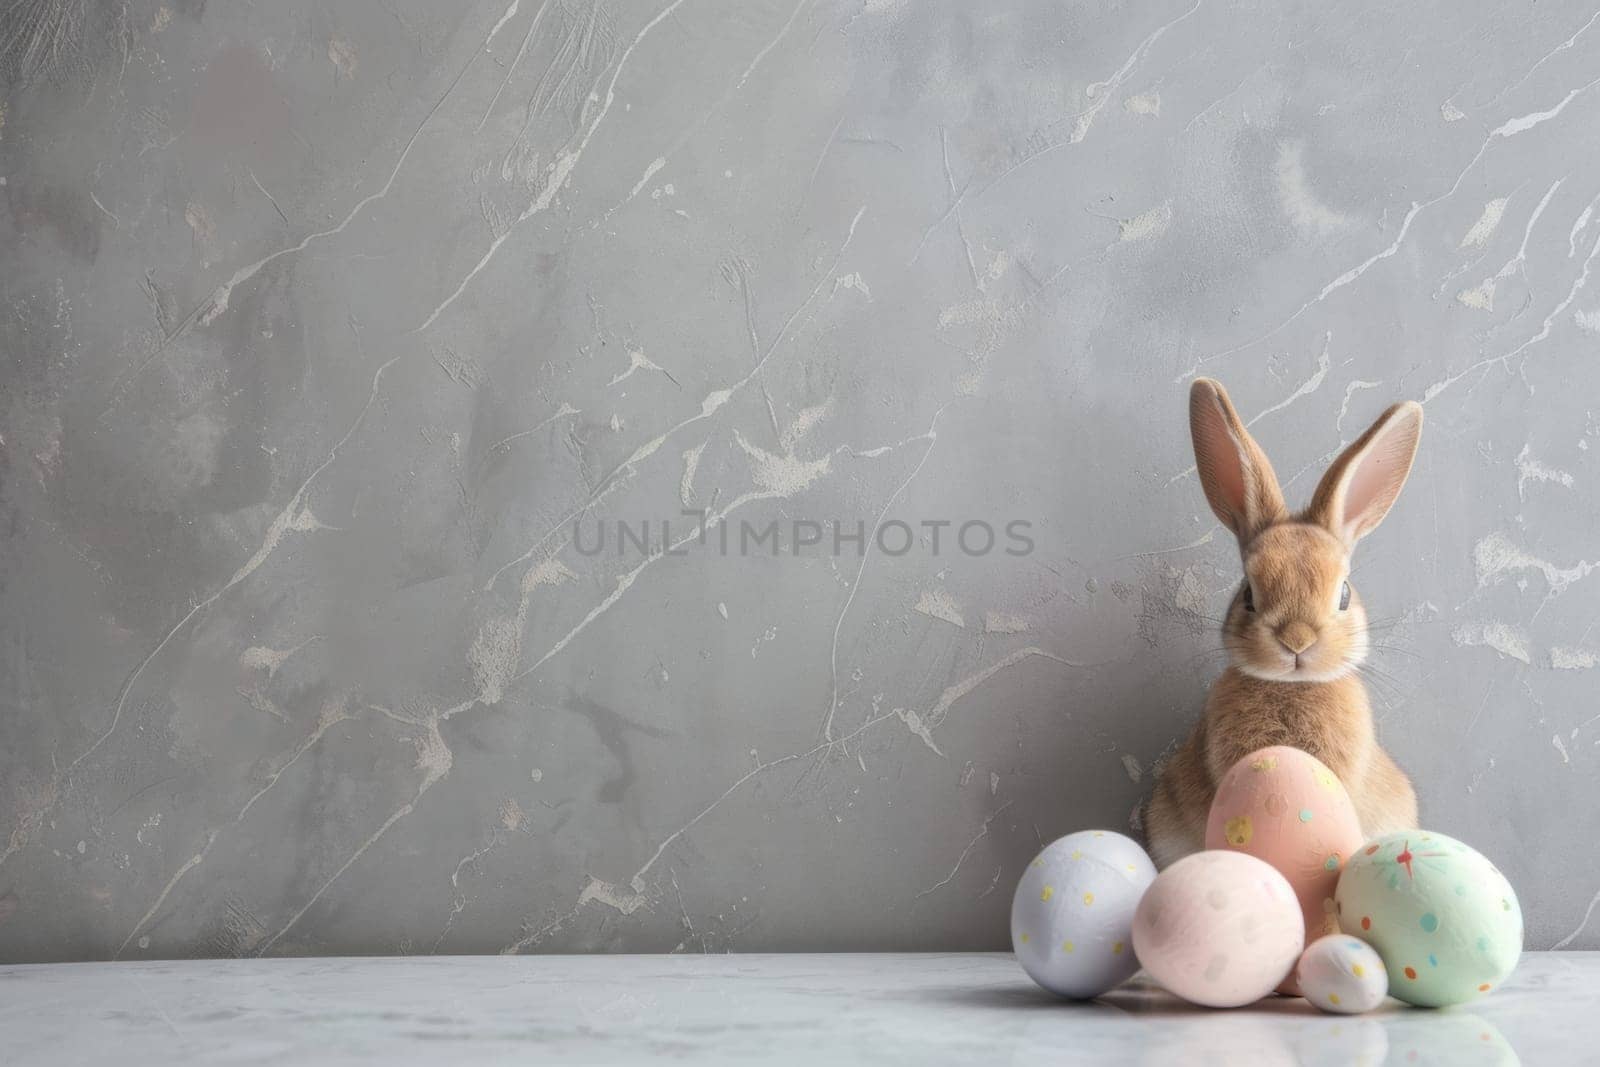 A rabbit is sitting on a table with a bunch of Easter eggs. The rabbit is the main focus of the image, and the eggs are scattered around it. Concept of warmth and joy